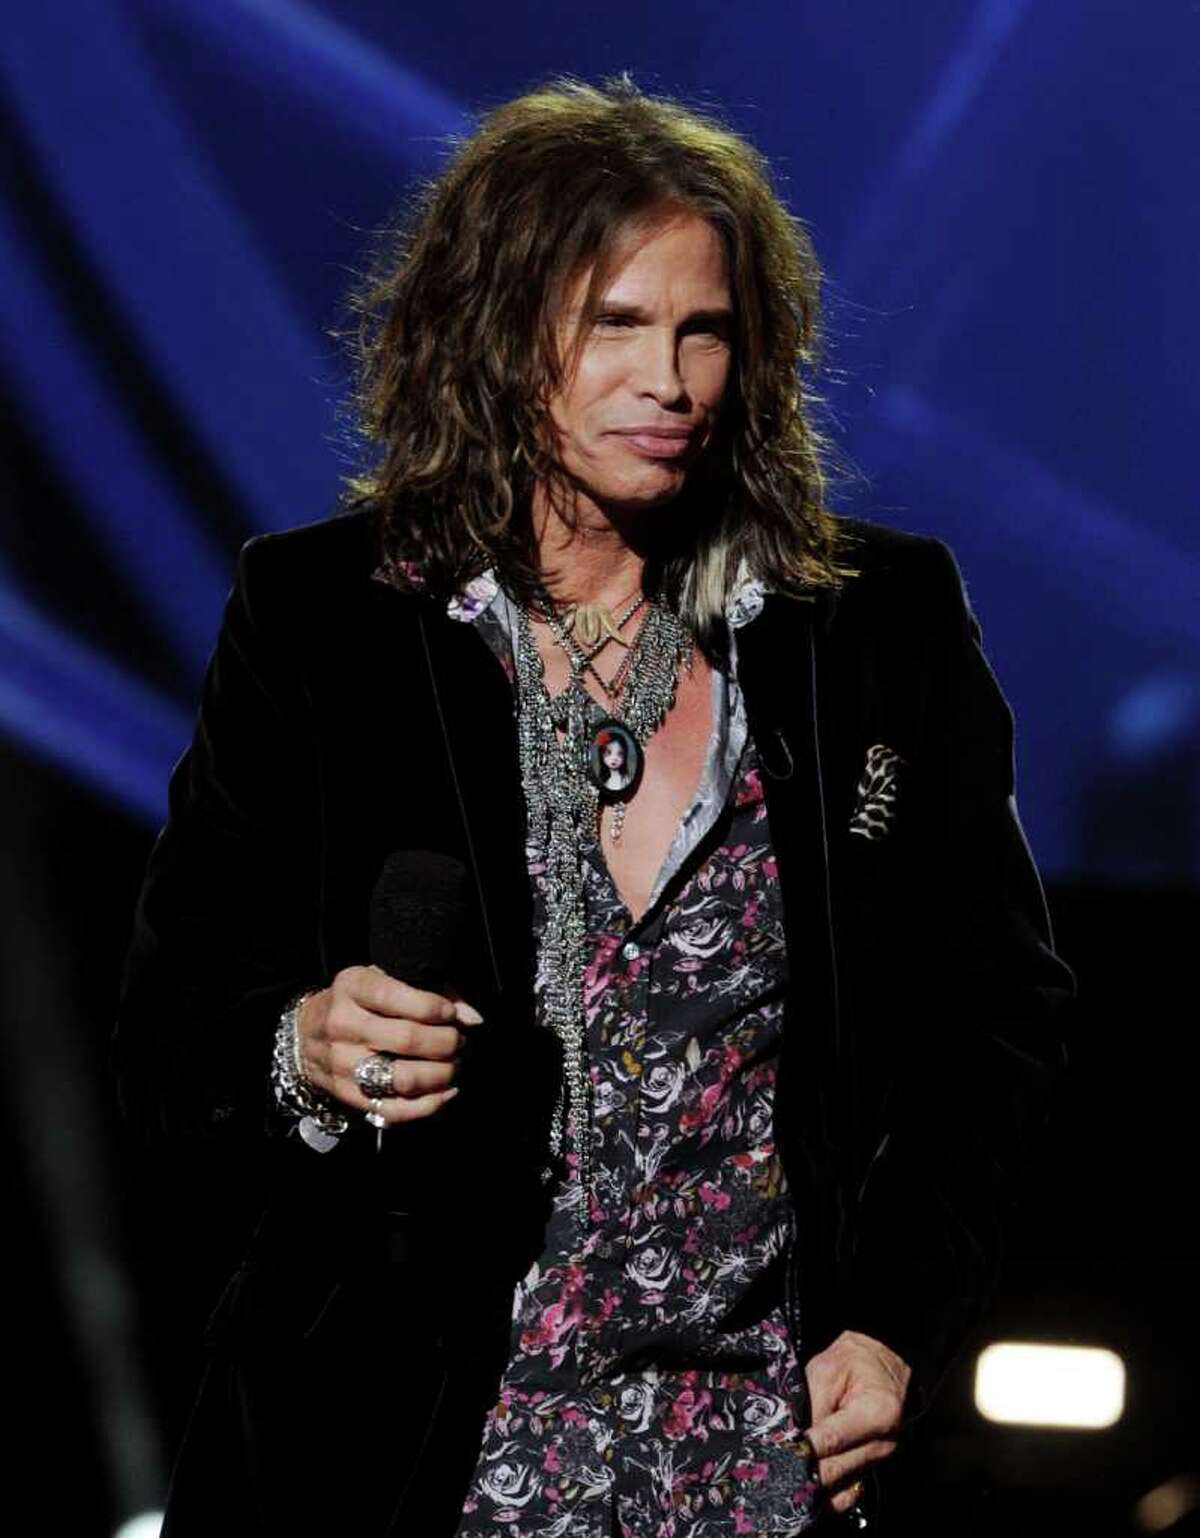 INGLEWOOD, CA - SEPTEMBER 22: Singer Steven Tyler appears onstage at a press conference to officially announce the season 10 "American Idol" judges panel at The Forum on September 22, 2010 in Inglewood, California. (Photo by Kevin Winter/Getty Images) *** Local Caption *** Steven Tyler